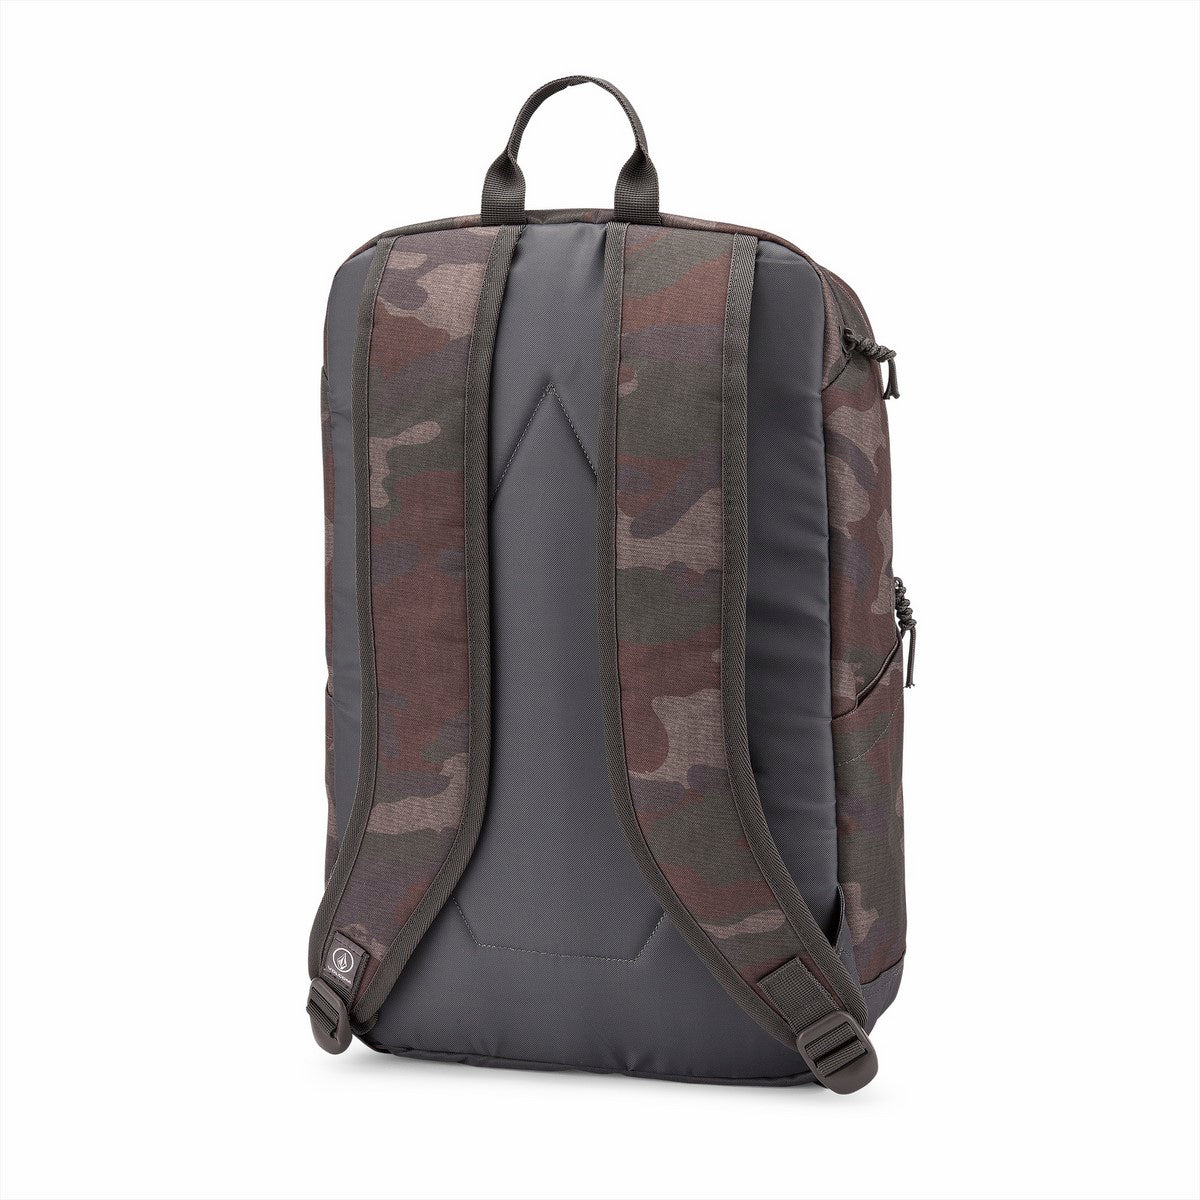 VOLCOM SCHOOL BACKPACK - ARMY GREEN COMBO